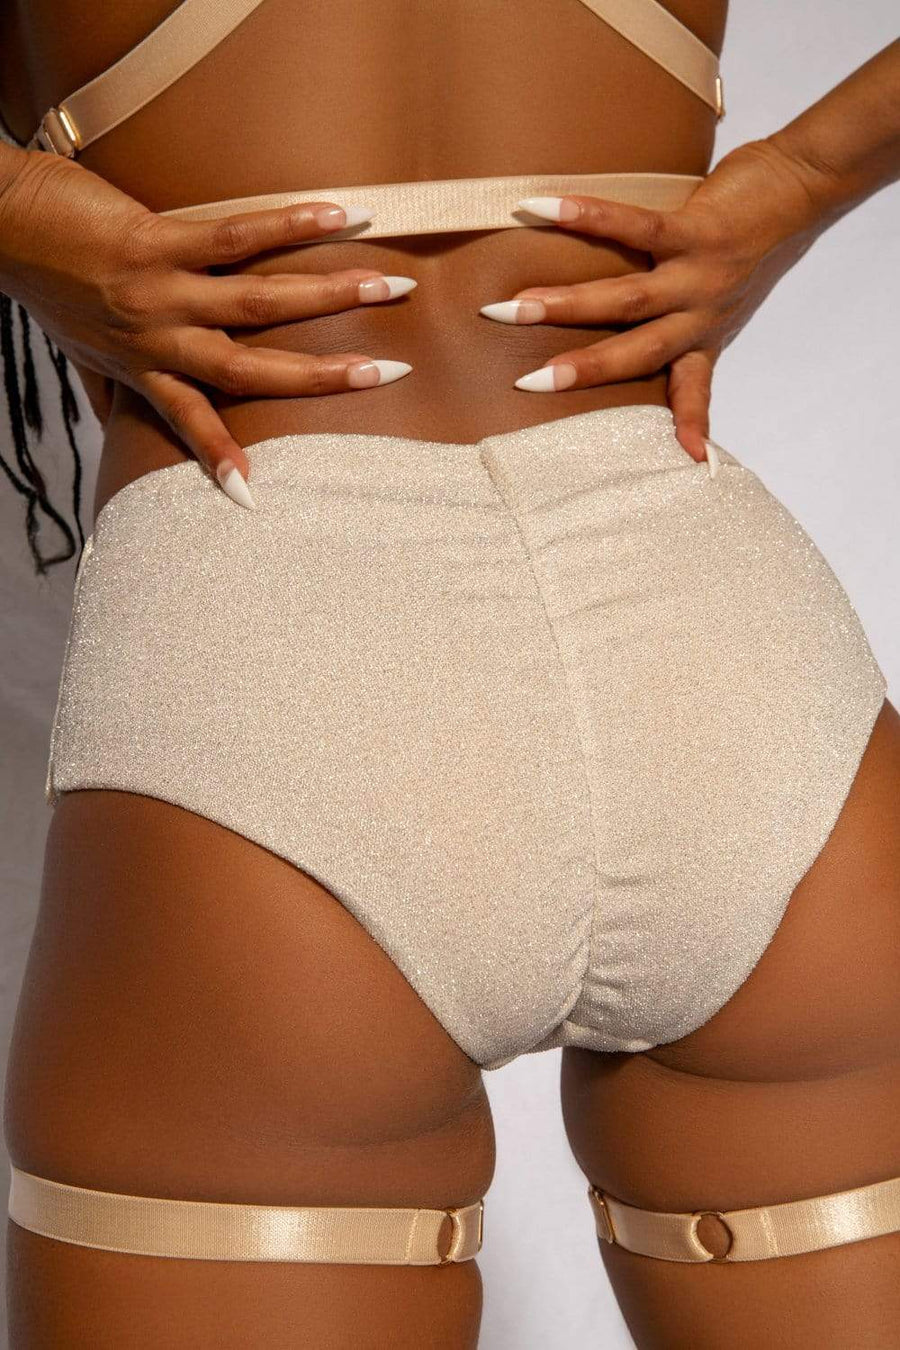 Cora Cheeky Bottoms - Champagne With Garter Shorts